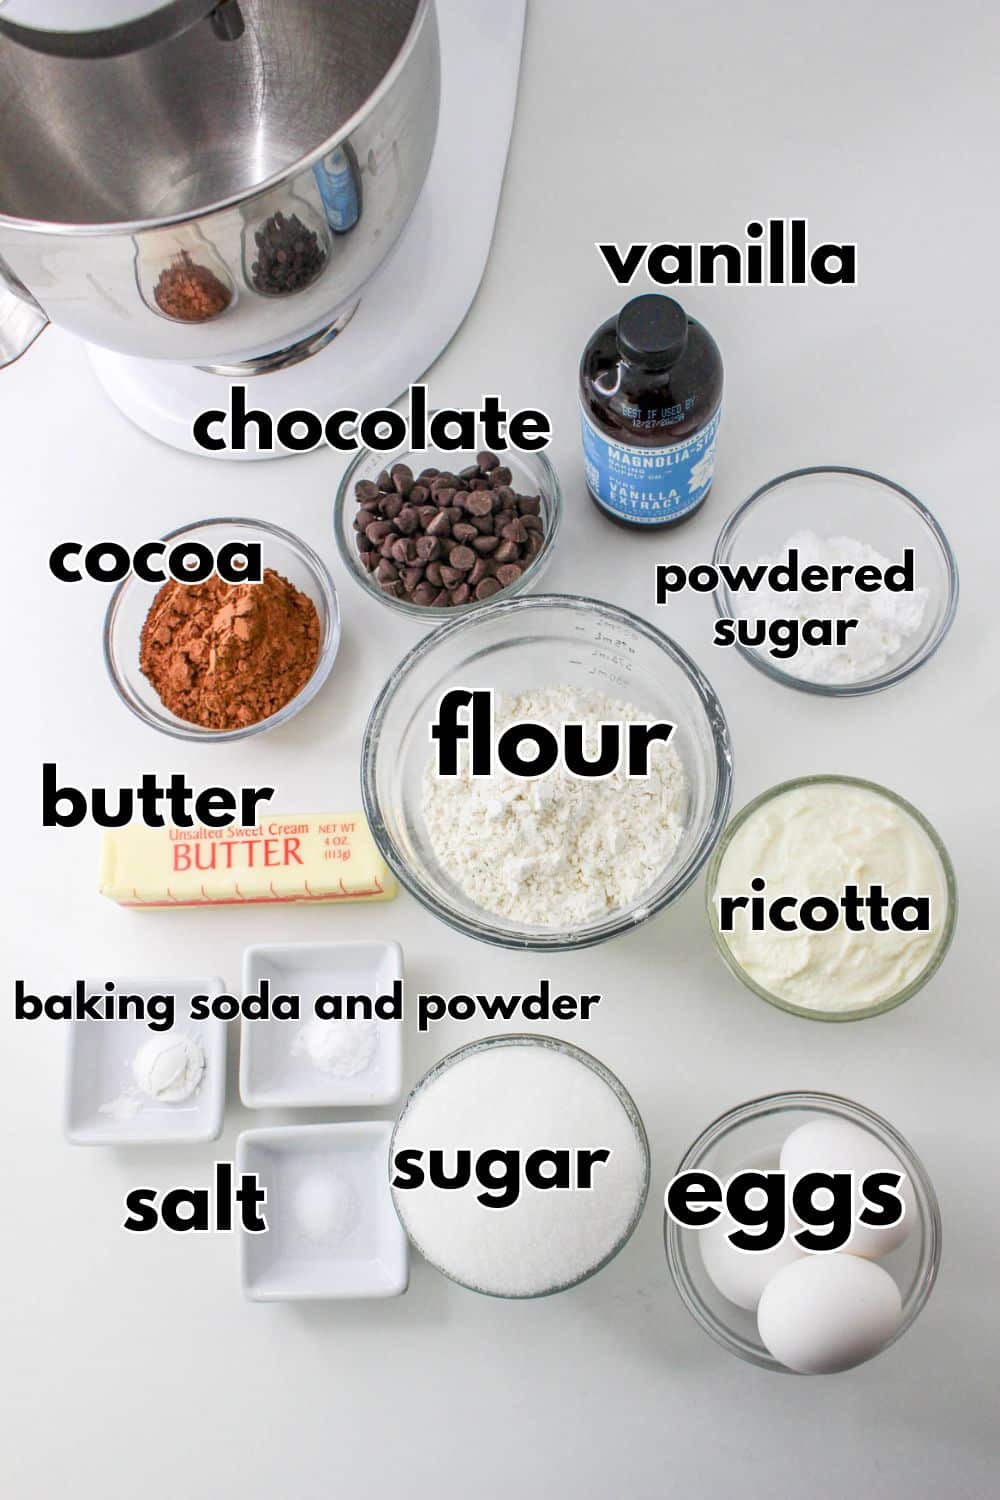 ingredients for riccotta cake on table: flour, cocoa, eggs, butter, sugar, ricotta , powdered sugar, salt, baking soda, baking powder, and pchocolate chips